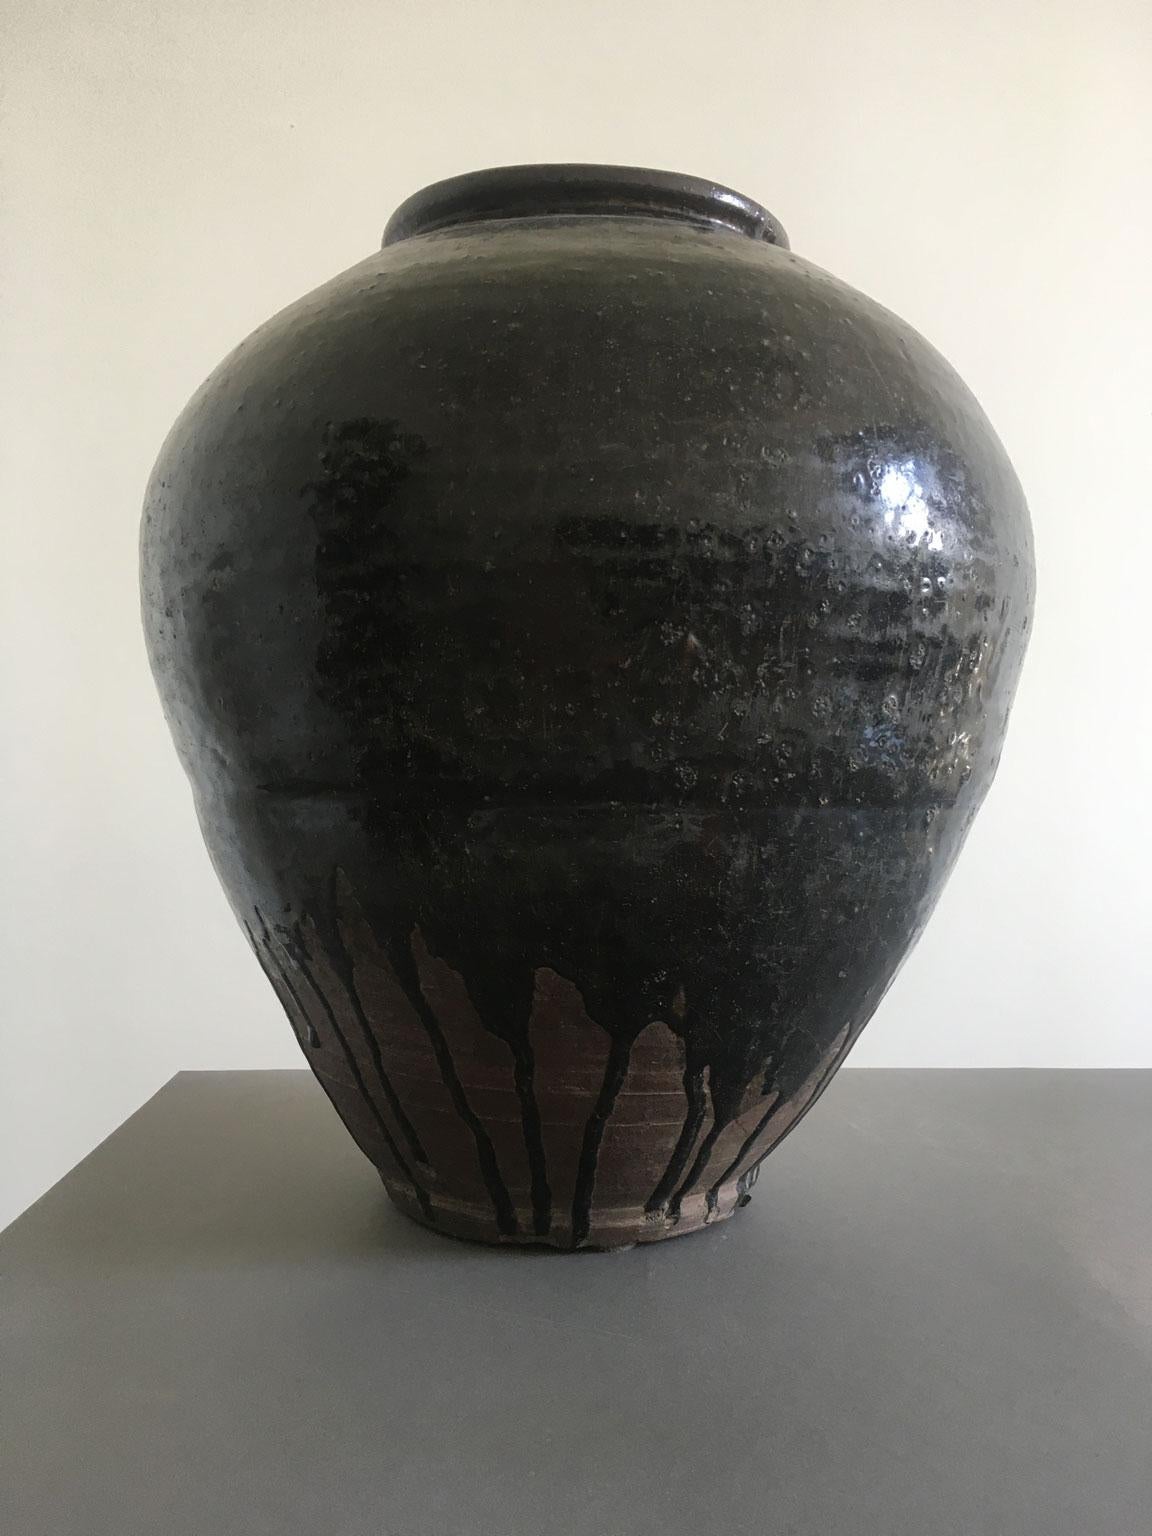 This Khmer brown glazed terracotta vase is a very stunning piece with its organic shape and all the signs of the time.
The enameled surface well shows its period and for this reasons the piece is an eye catching in every room.
It is not easy to find